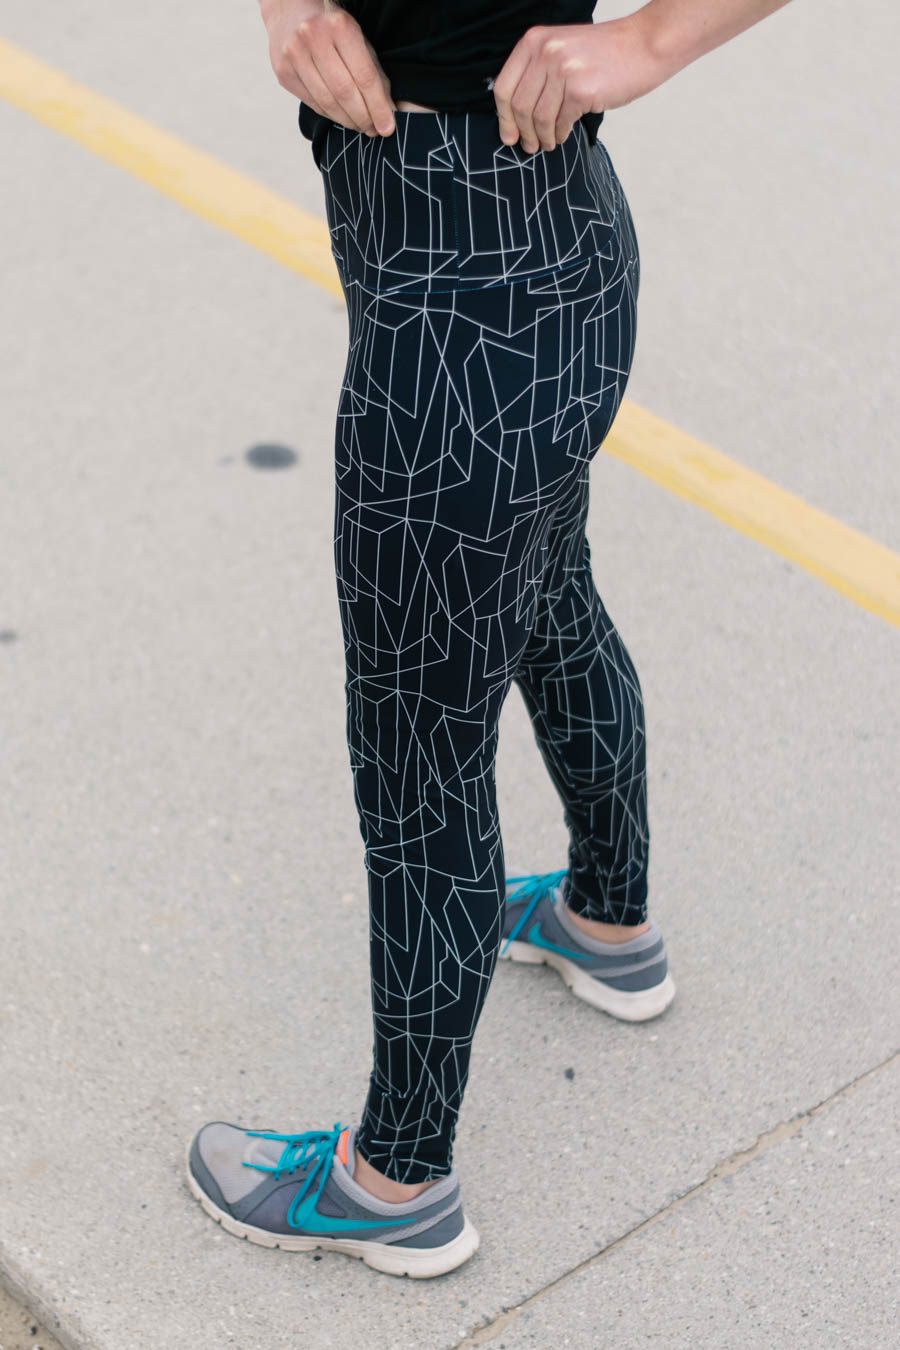 Avery Leggings + Pine Crest Fabrics – The Sewing Things Blog